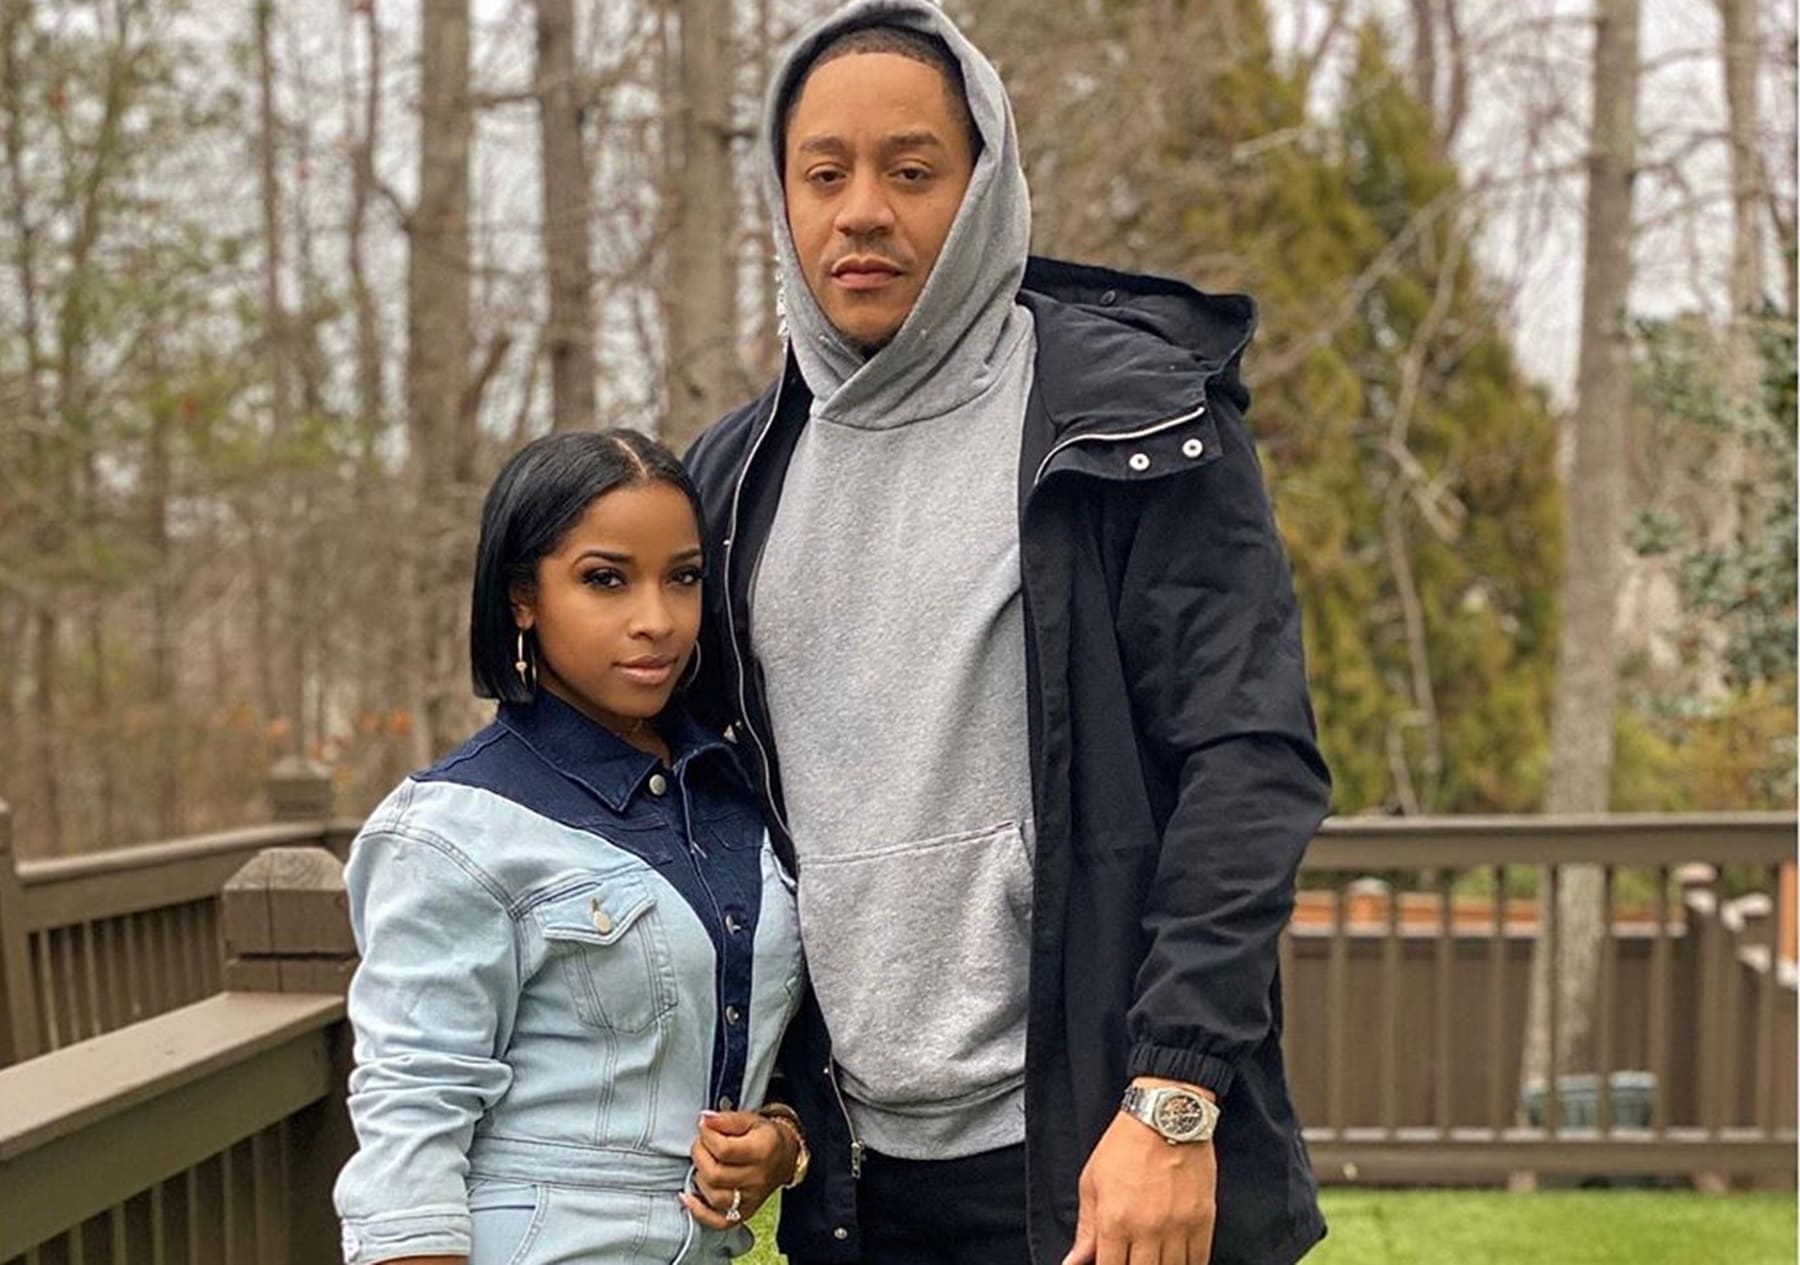 Toya Johnson Hits The Mountain For A Quick Workout With Robert Rushing - See Their Video